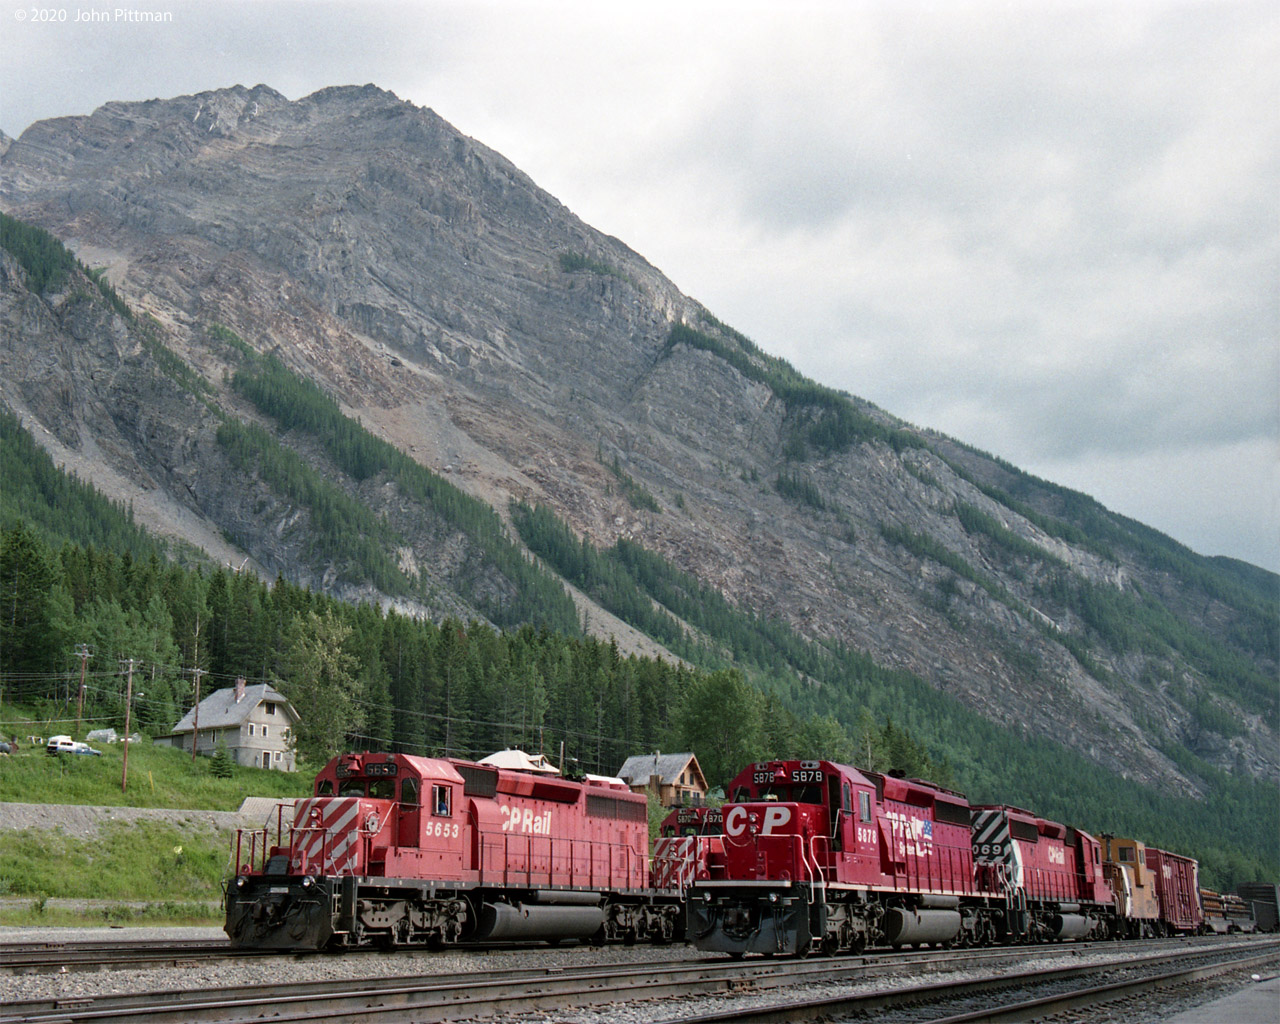 Two CP trains are waiting in Field Yard for the track ahead to clear so they can continue east.
The steep grades of the Big Hill lie ahead of them, eased to a manageable 2+ % by the spiral tunnels.
In 1993 CP mainline freight trains were predominantly powered by SD40-2's; their first GE's would arrive in 1995.
CP 5878 wears then-new CP Rail System two-flags scheme, while its trailing unit CP 6069 is in action red with the multimark. CP 6069's windows were painted red, a B-unit not intended for occupancy. First car is Angus caboose CP 434374. 
The other train is lead by CP 5653 in faded action red (no multimark), second unit CP 5870 looks similar.
Mount Stephen is nearby, but I think this south-facing view has Mount Dennis in the background.